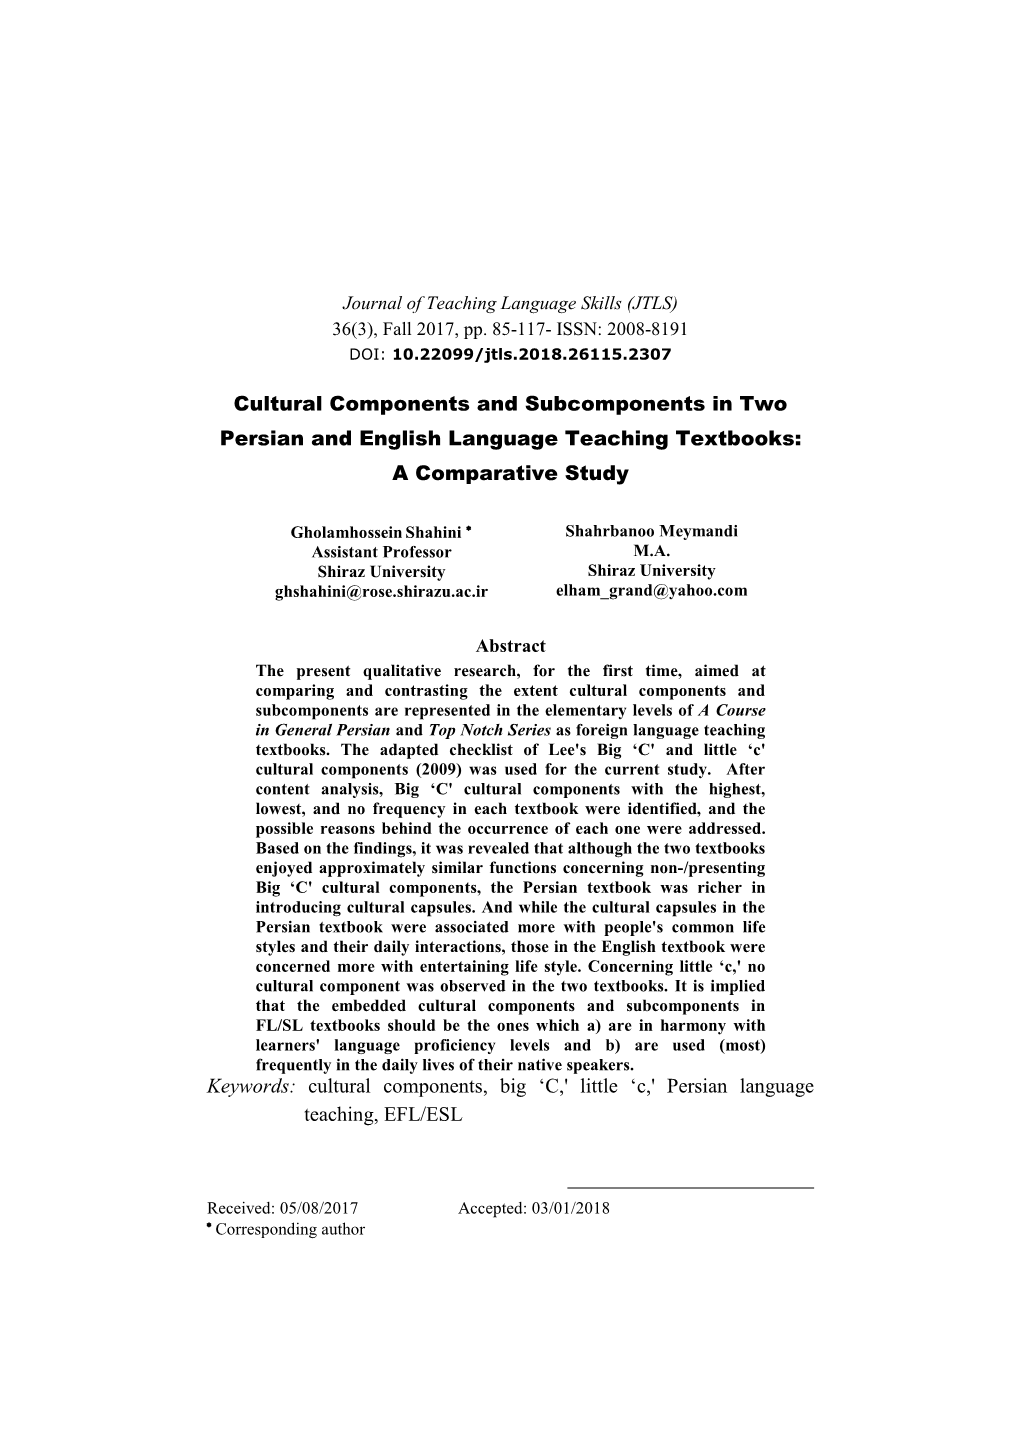 Cultural Components and Subcomponents in Two Persian and English Language Teaching Textbooks: a Comparative Study